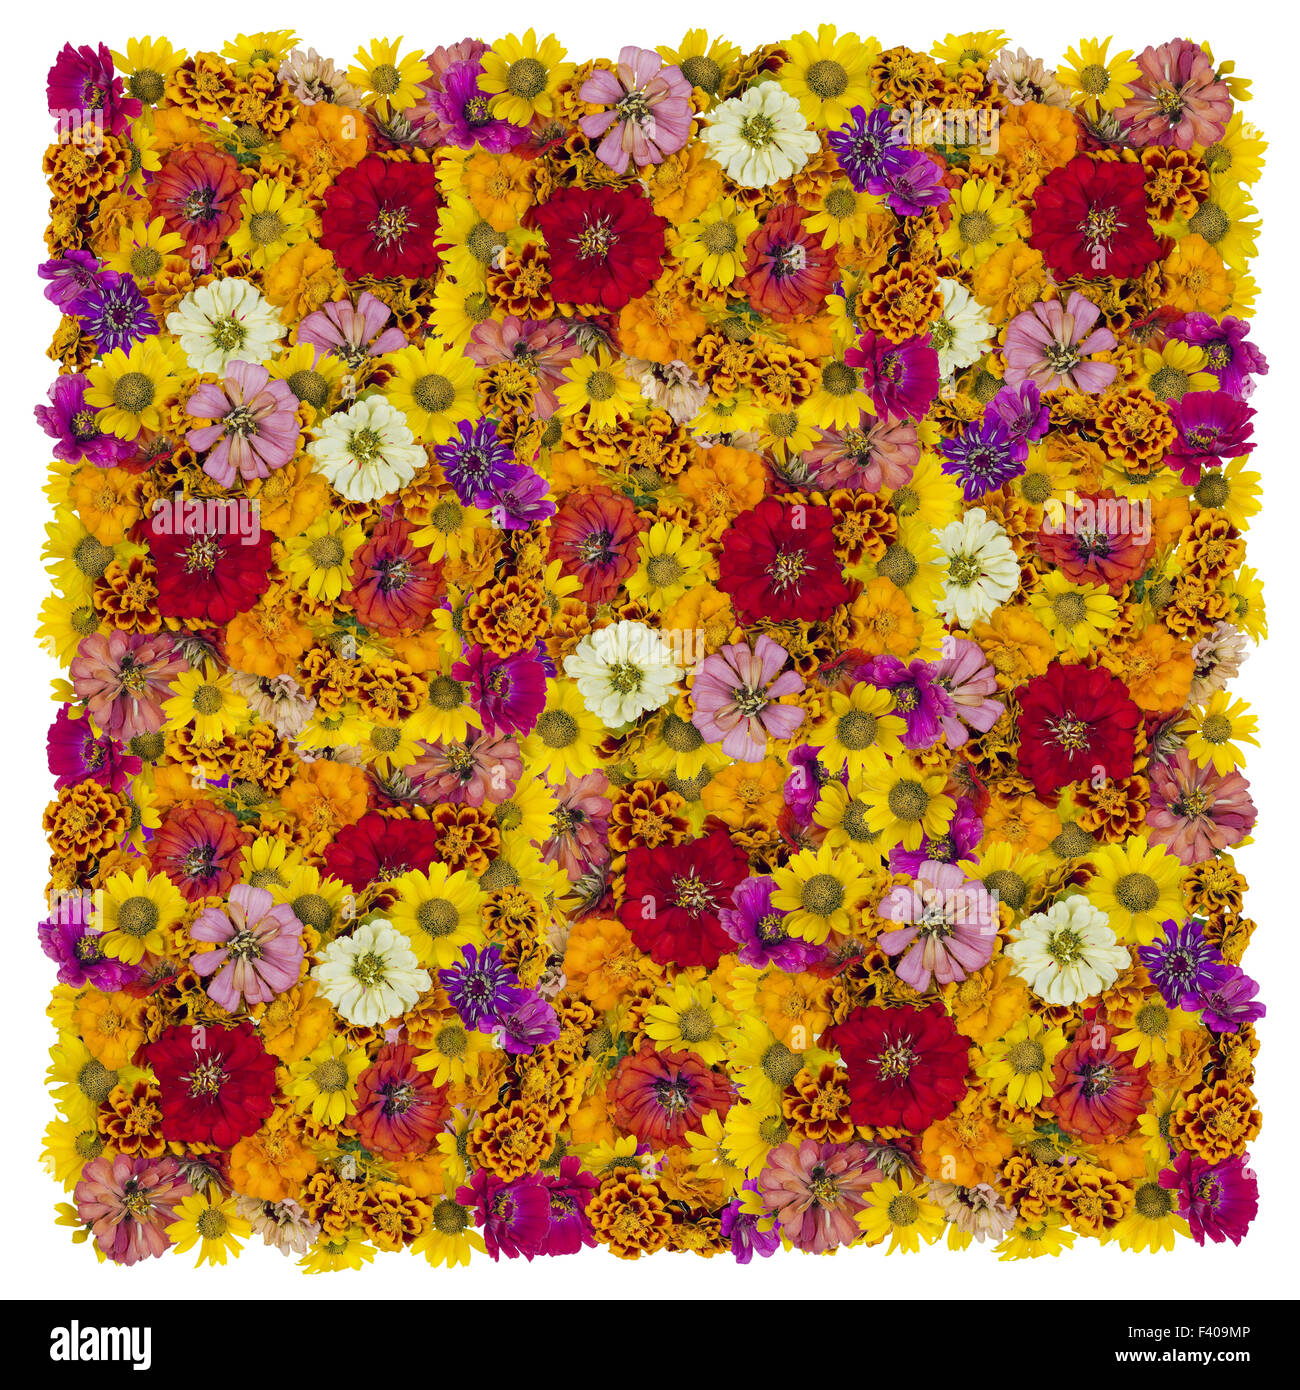 Floral square Stock Photo